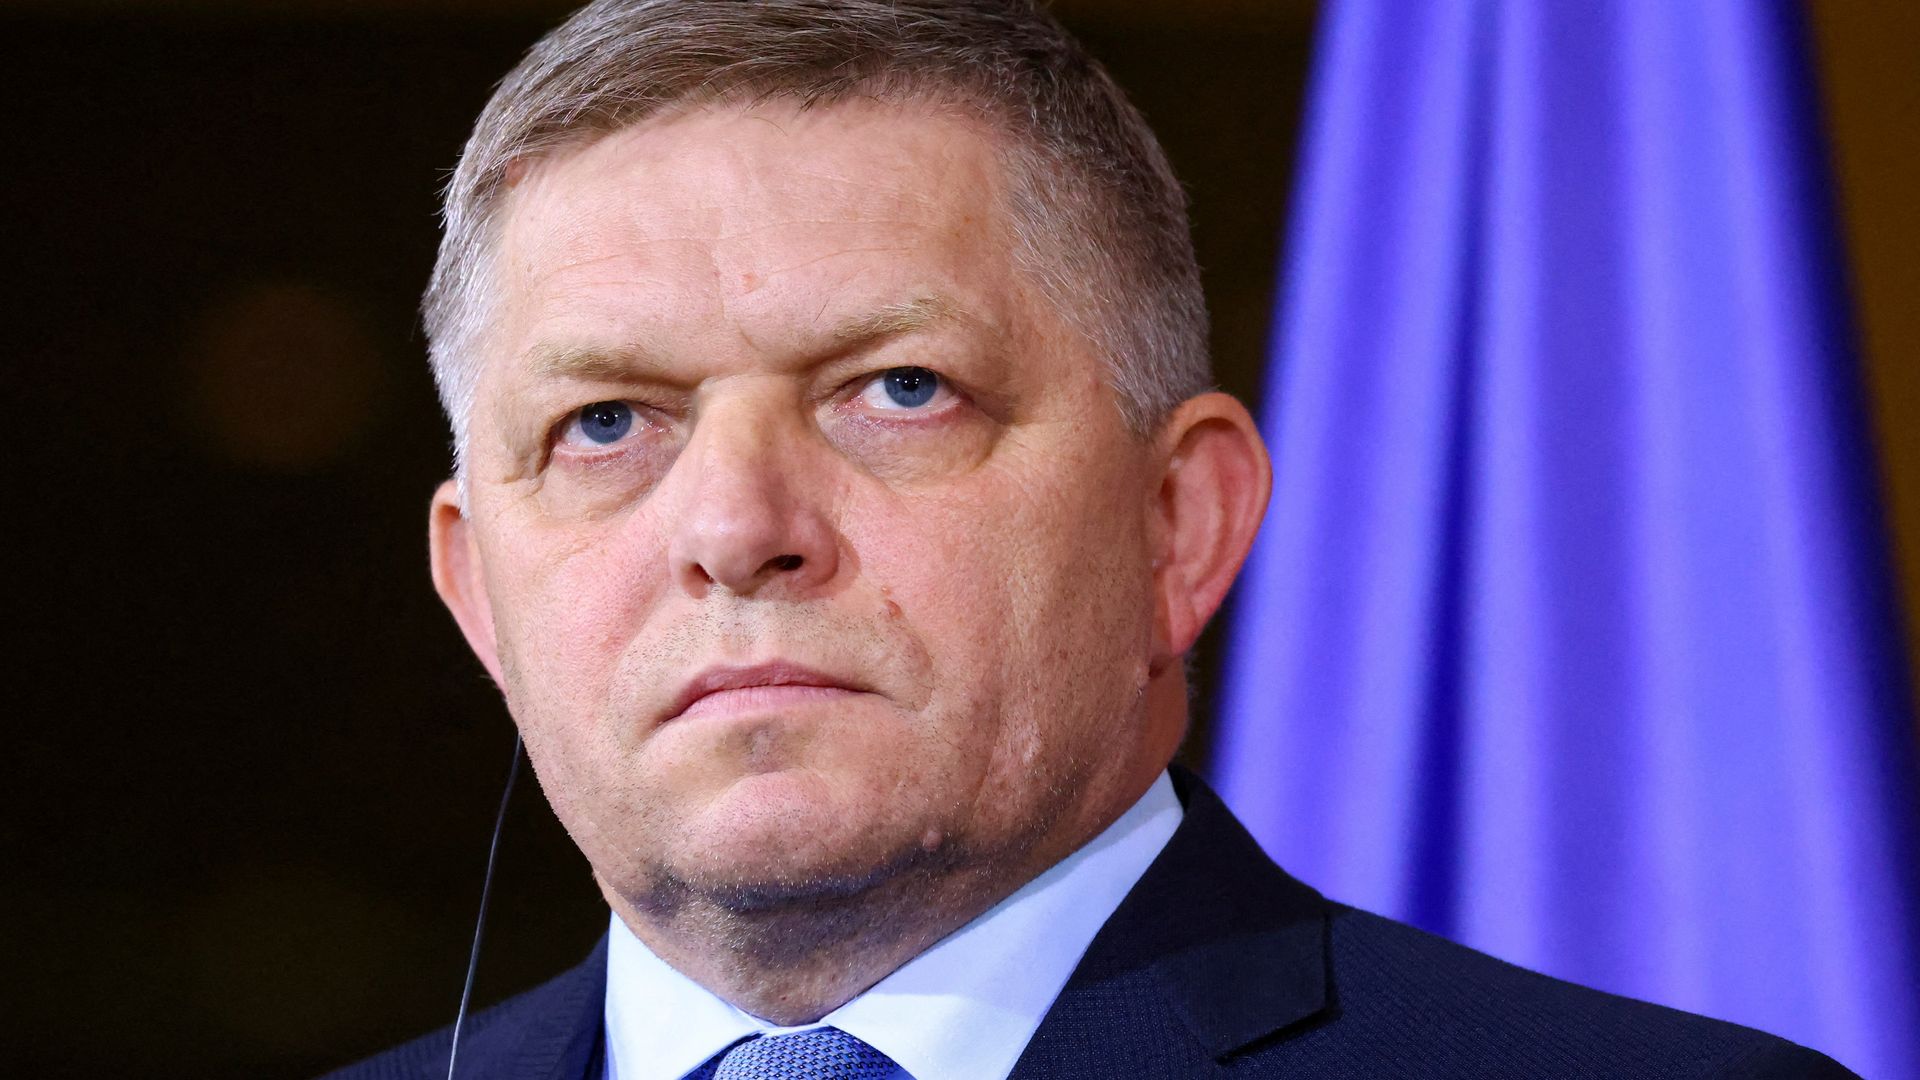 A culture of political violence is one factor contributing to the assassination attempt on Slovakian Prime Minister Robert Fico.